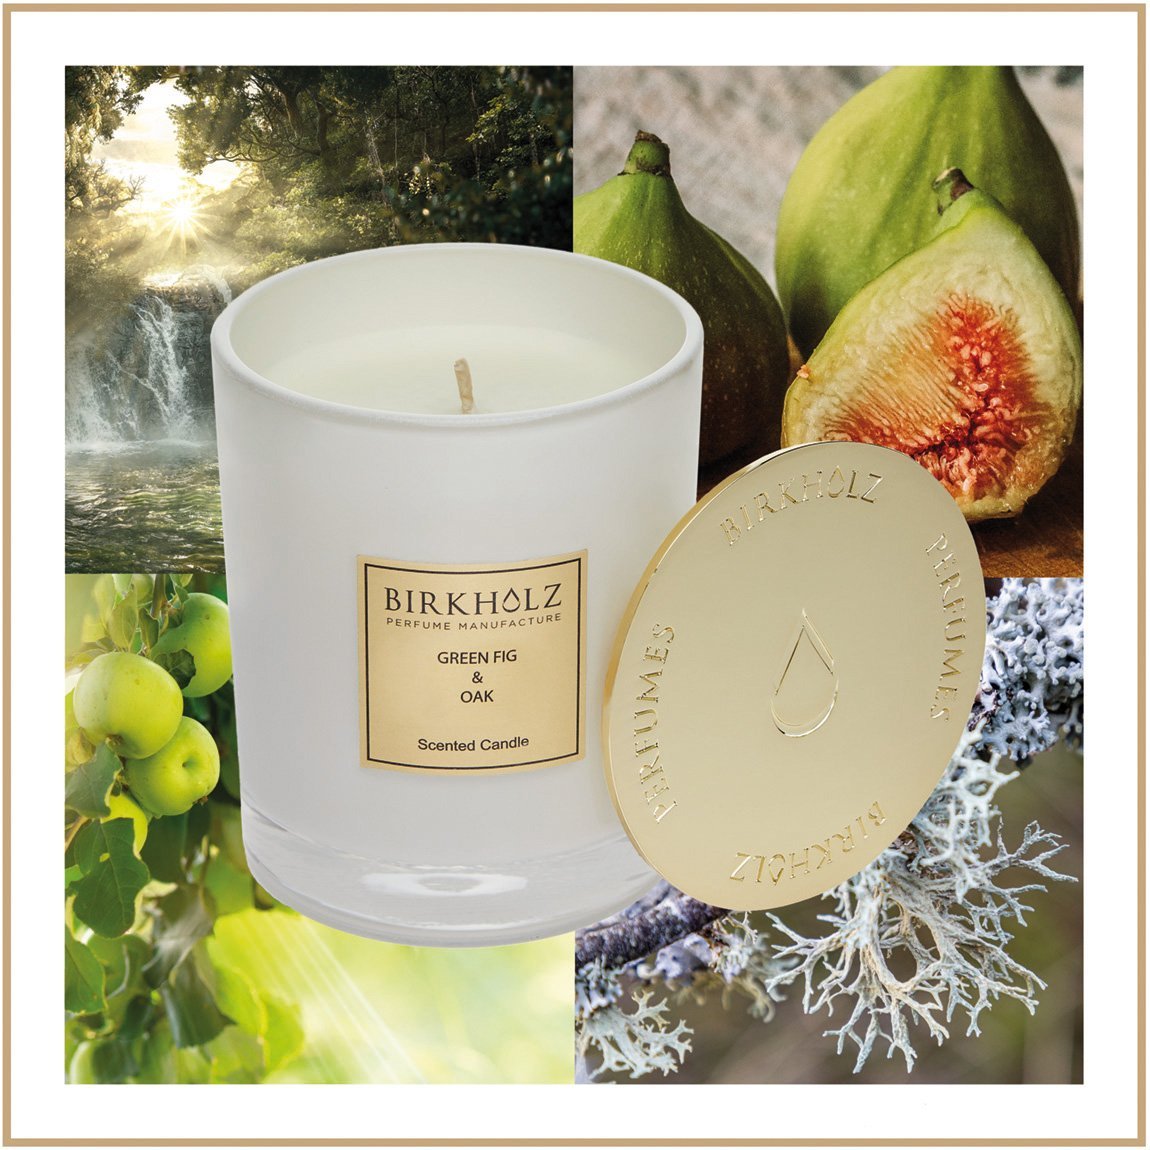 Scented Candle Green Fig & Oak - Birkholz Perfume Manufacture